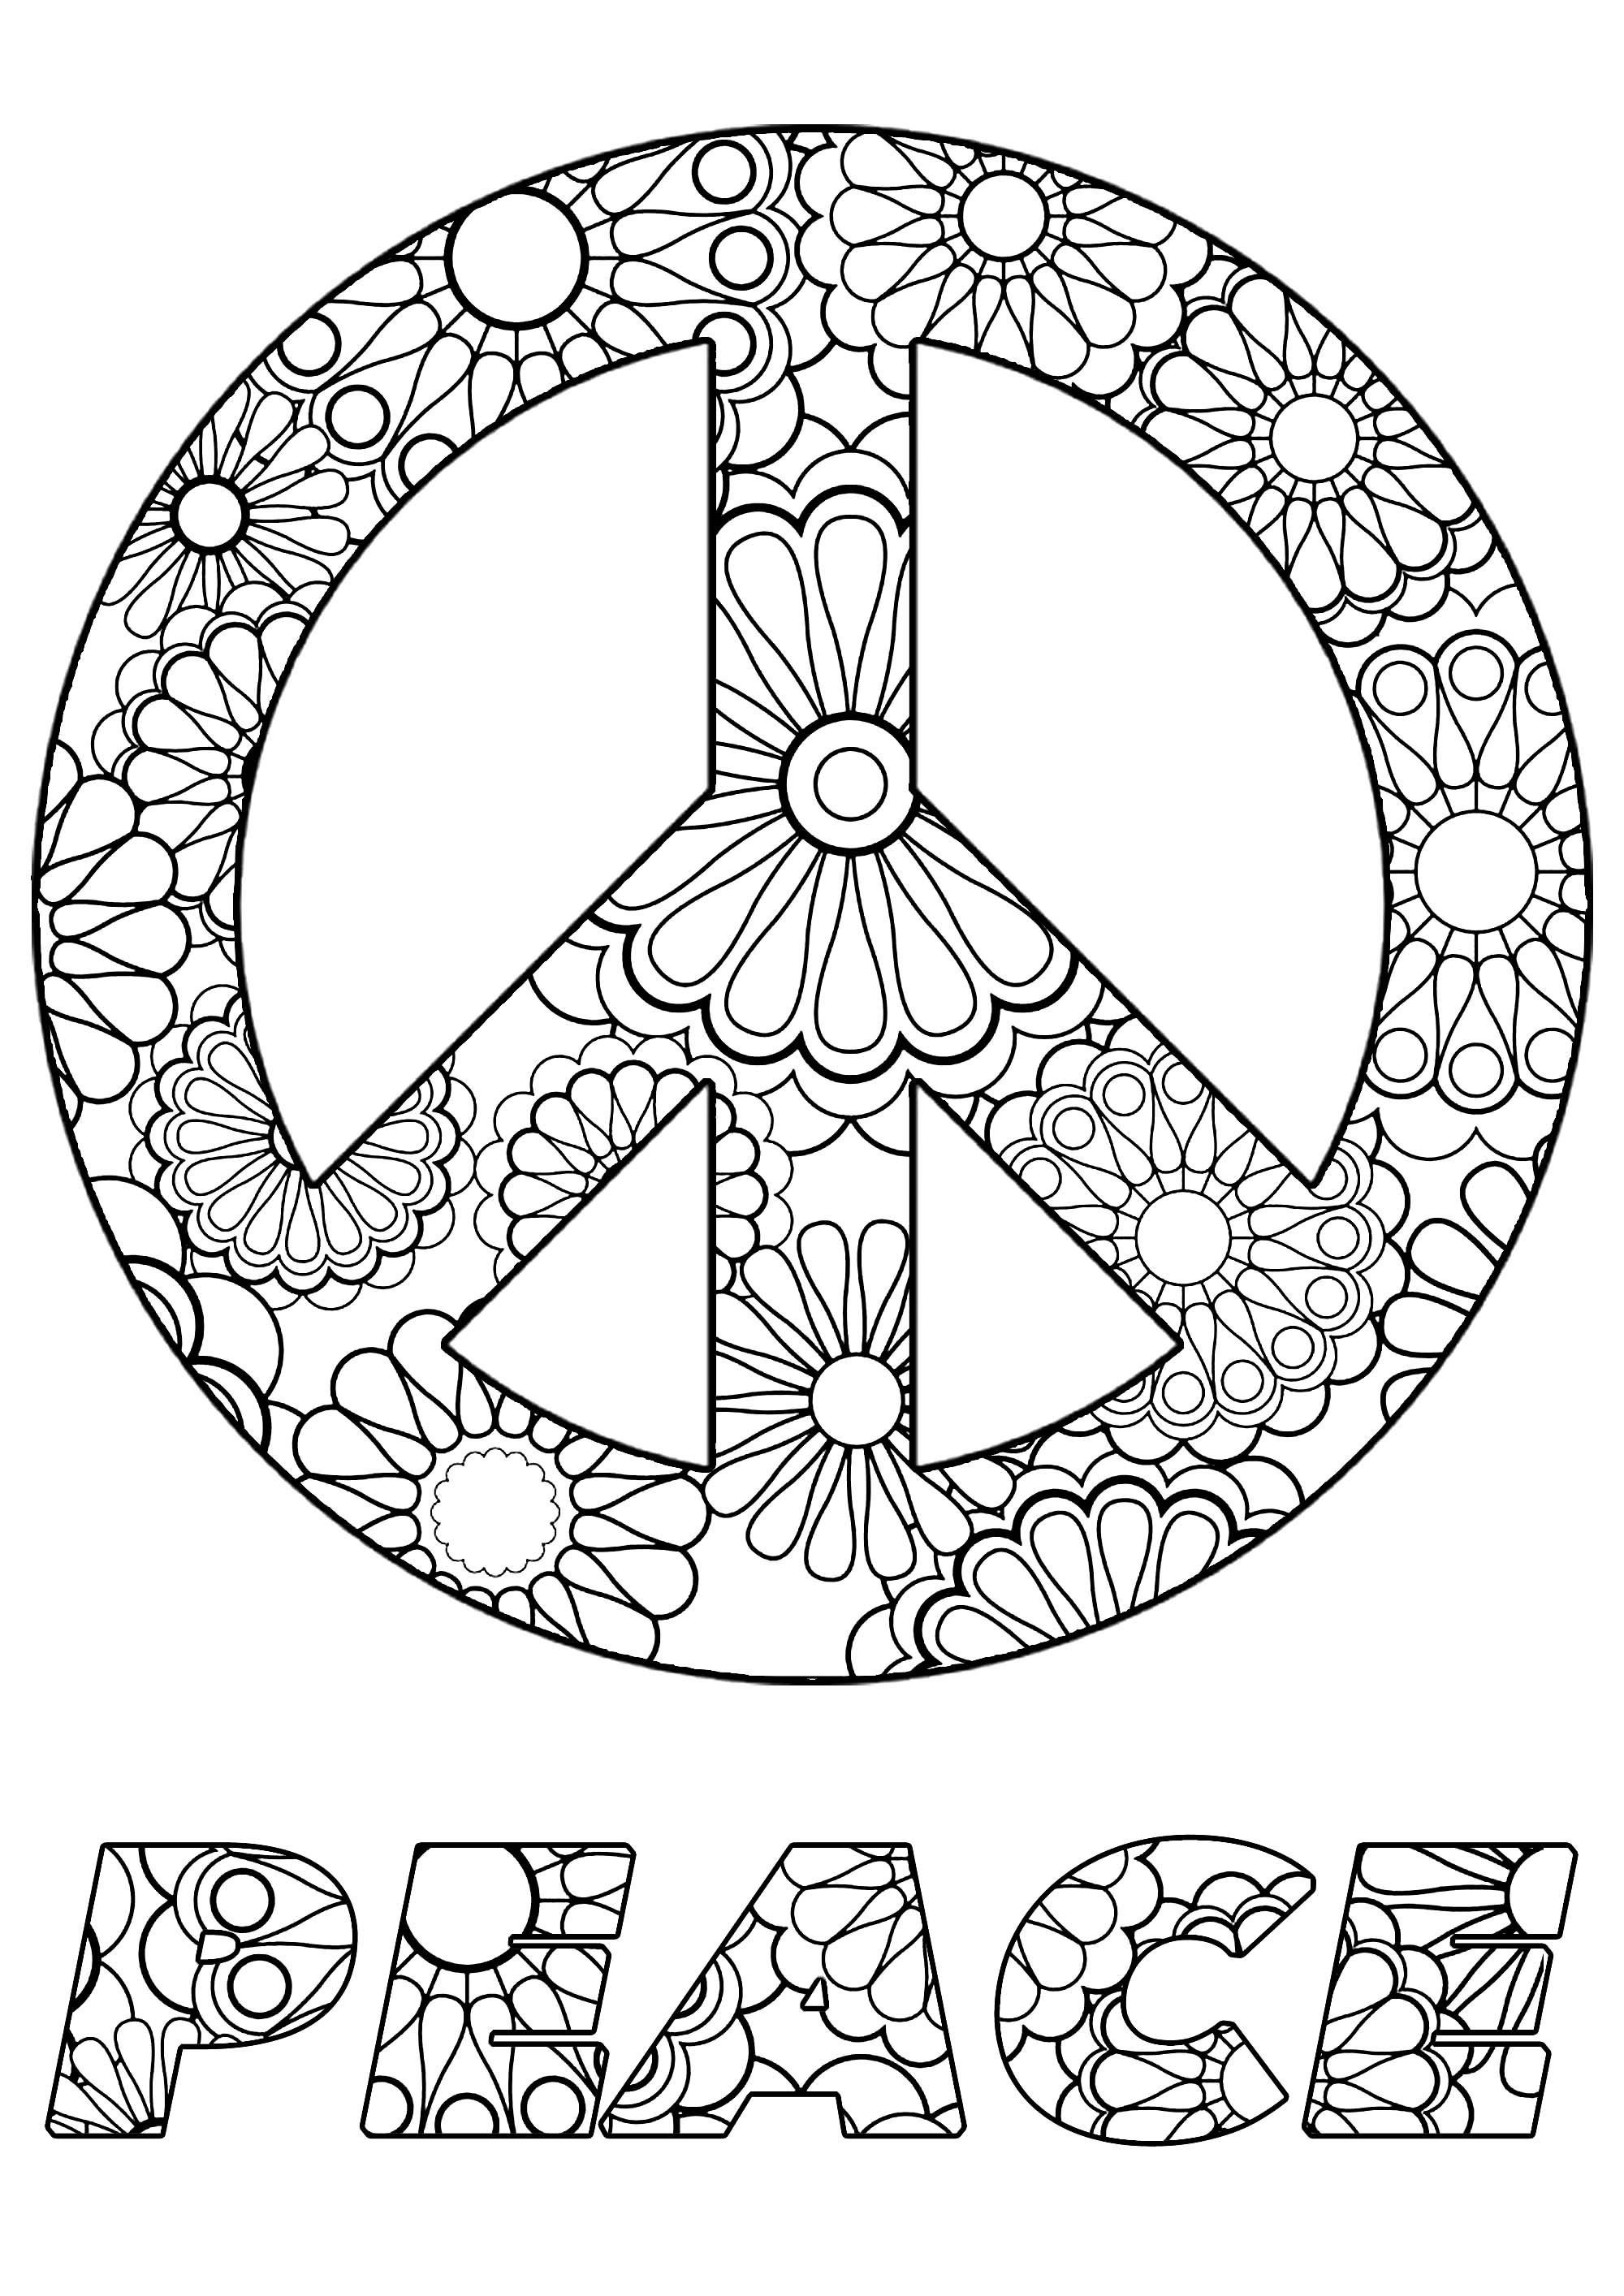 Free peace sign coloring pages pdf to print